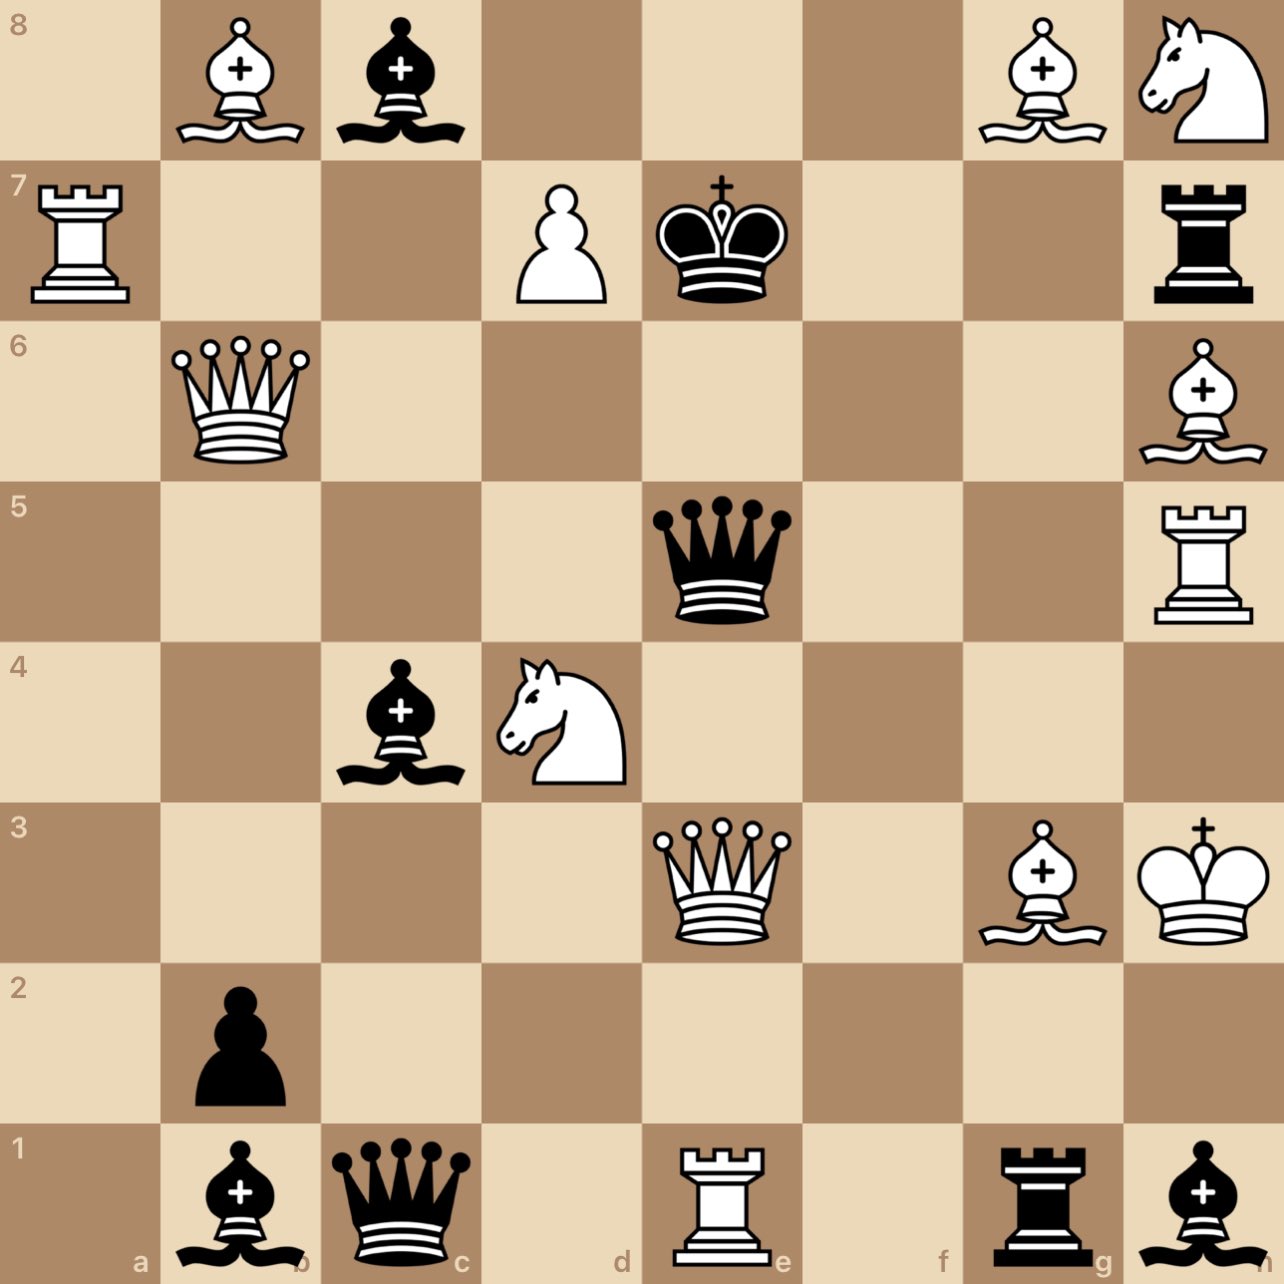 In chess, what's wrong with this opening for white? - Quora